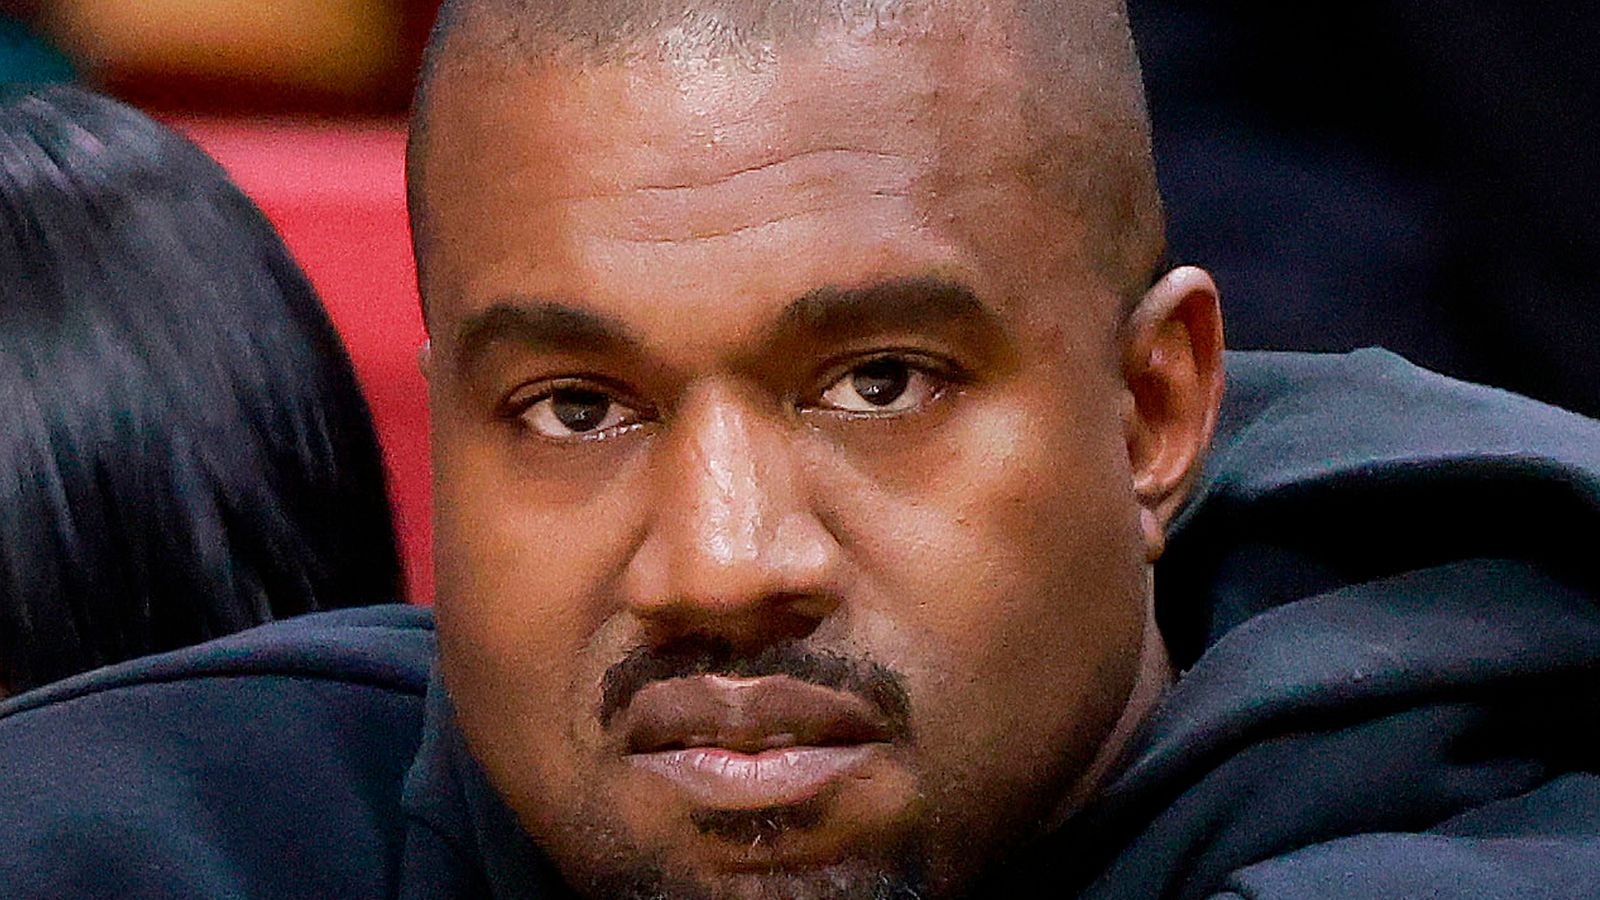 I Am The Only GOAT - Kanye West Says as He Claim He Is Better Than Kendrick and Drake